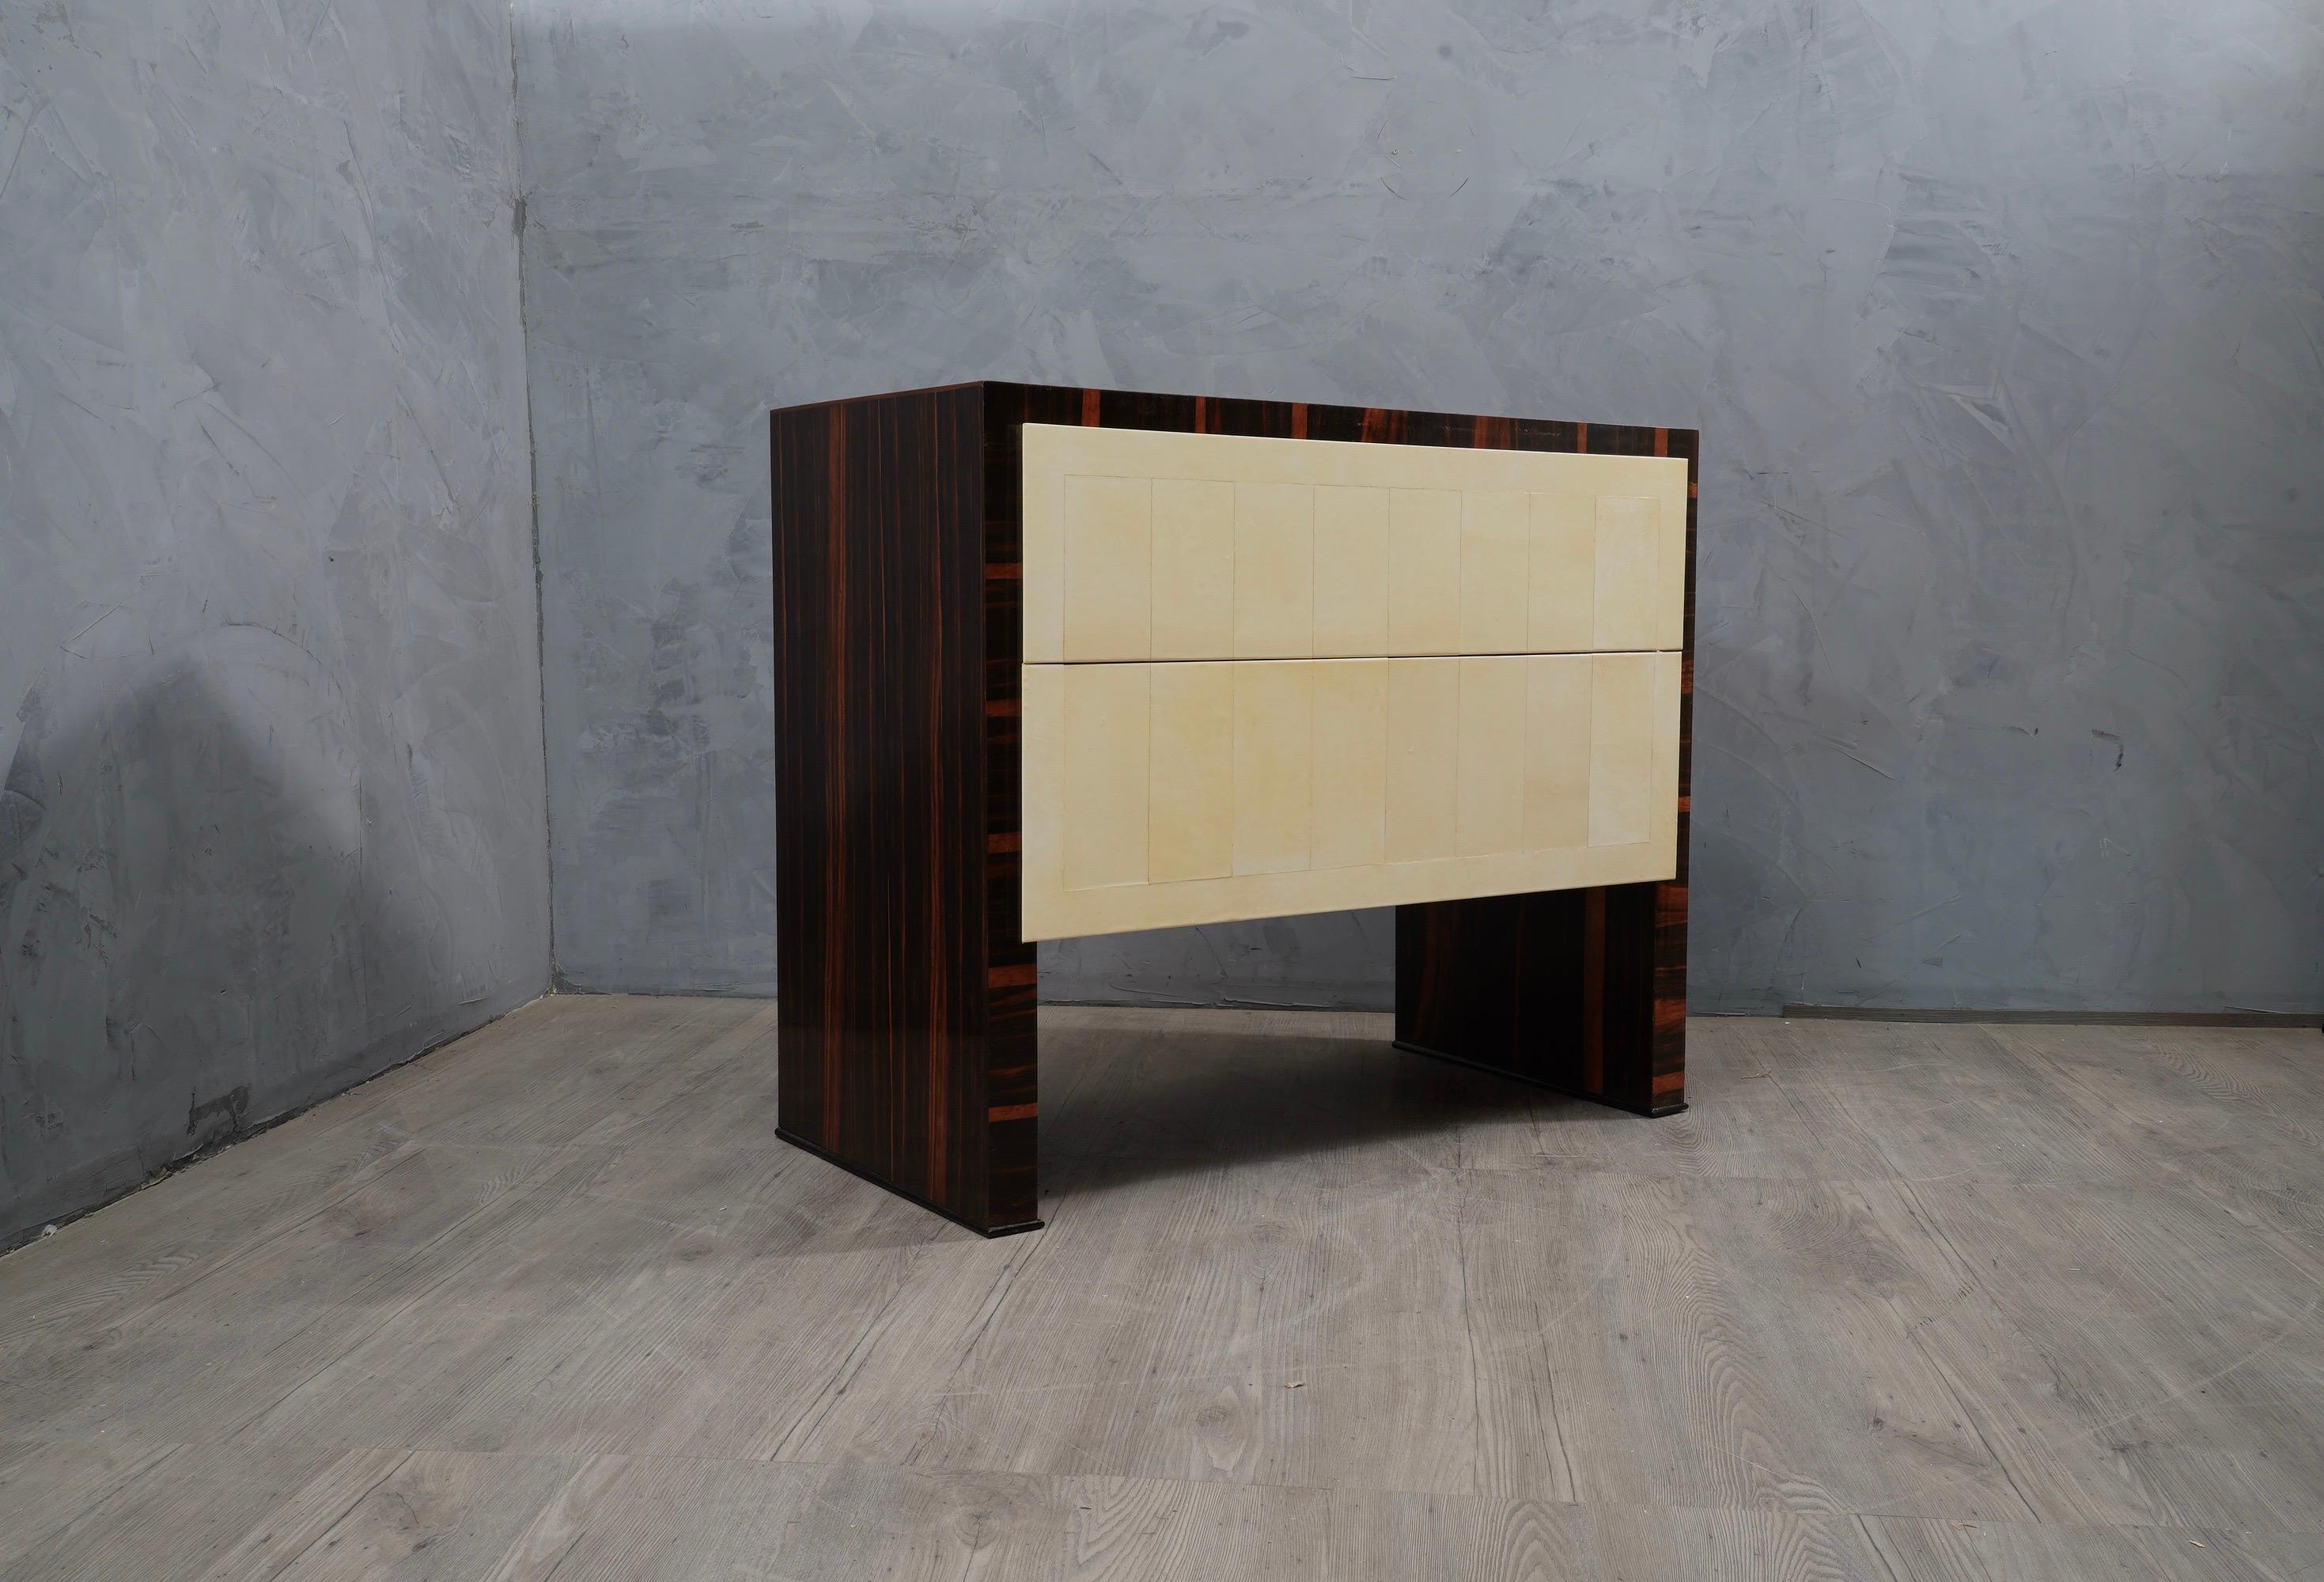 Perfect bedroom dresser all refinement and style both for the size of the entire design and for the utmost care taken for its entire finish.

A simple square design welcomes a Macassar wood veneer, with two front drawers covered in goatskin instead.